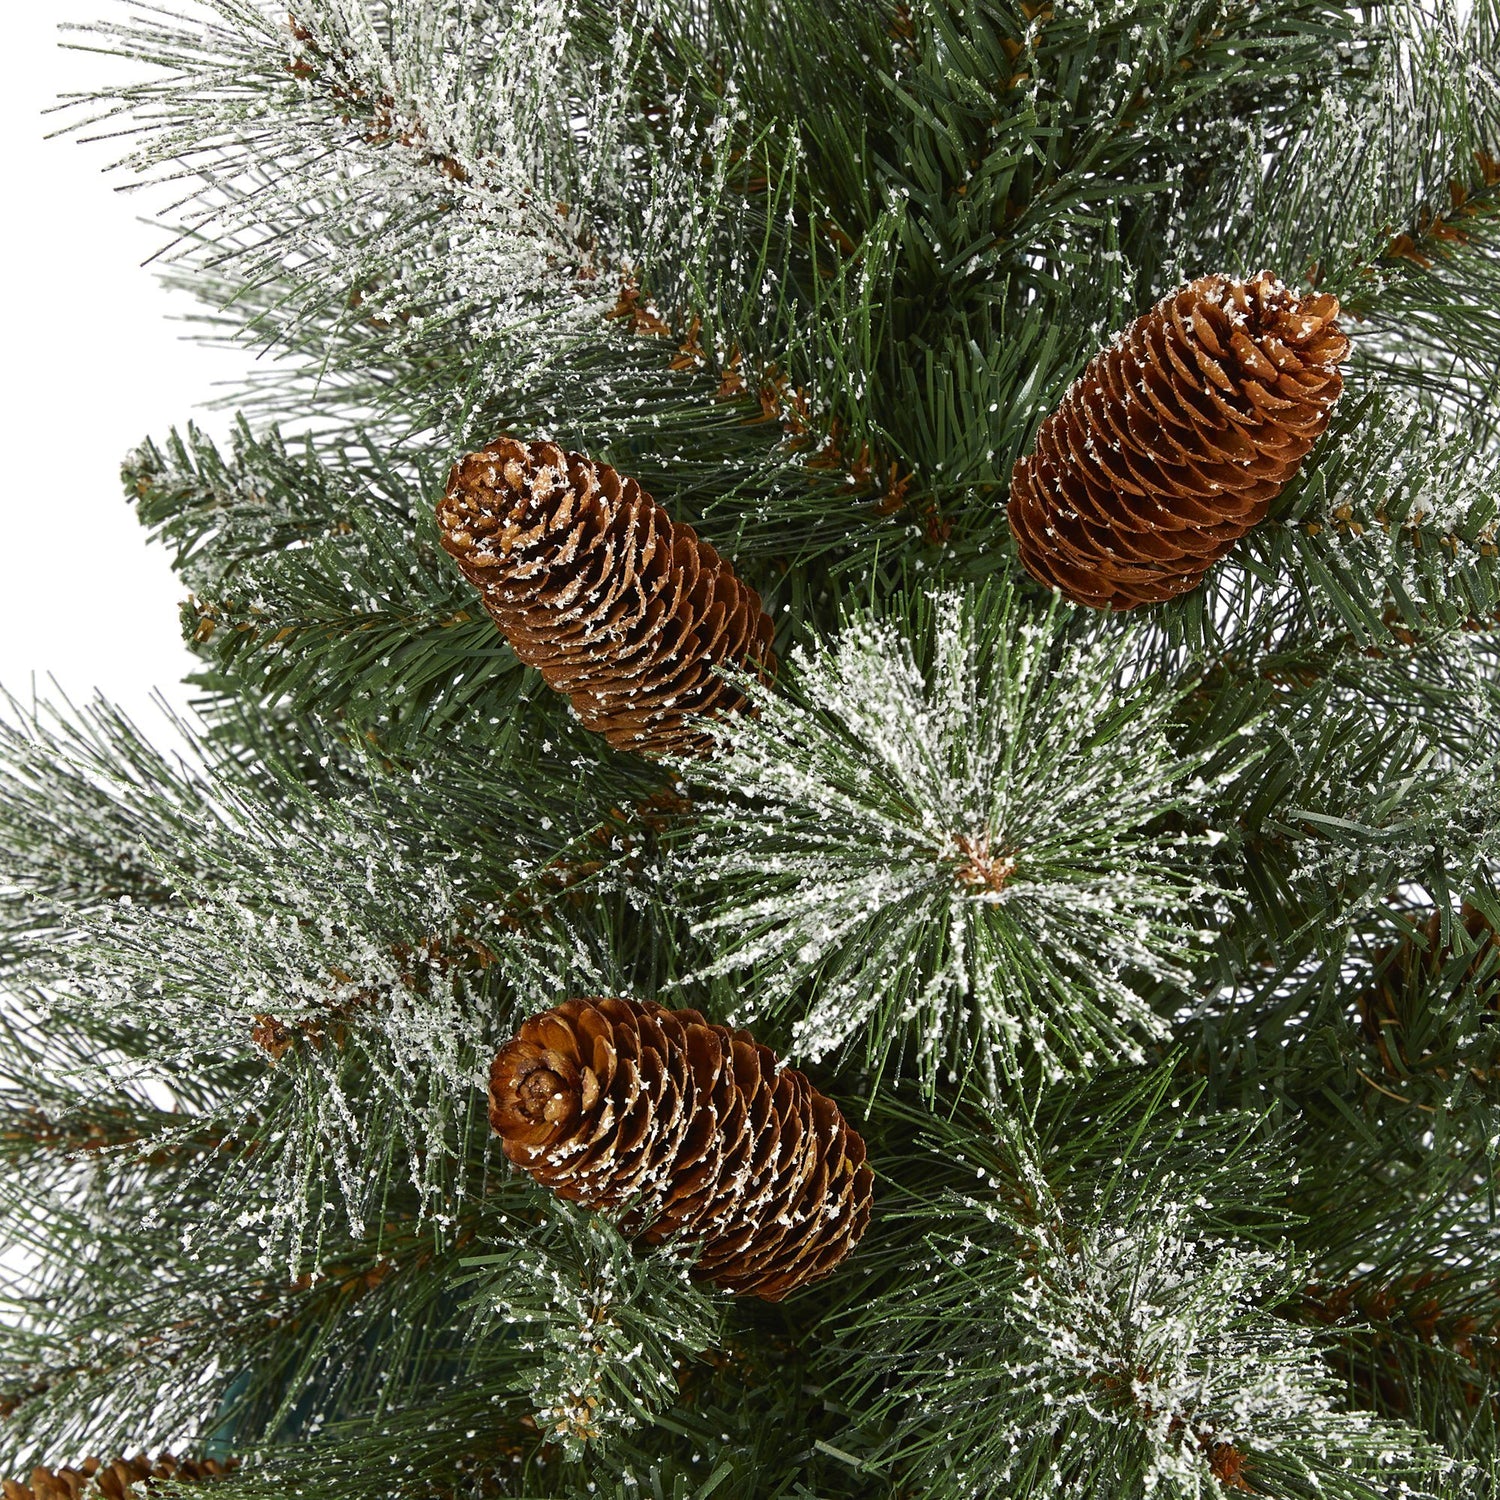 5’ Snowed French Alps Mountain Pine Artificial Christmas Tree with 387 Bendable Branches and Pine Cones